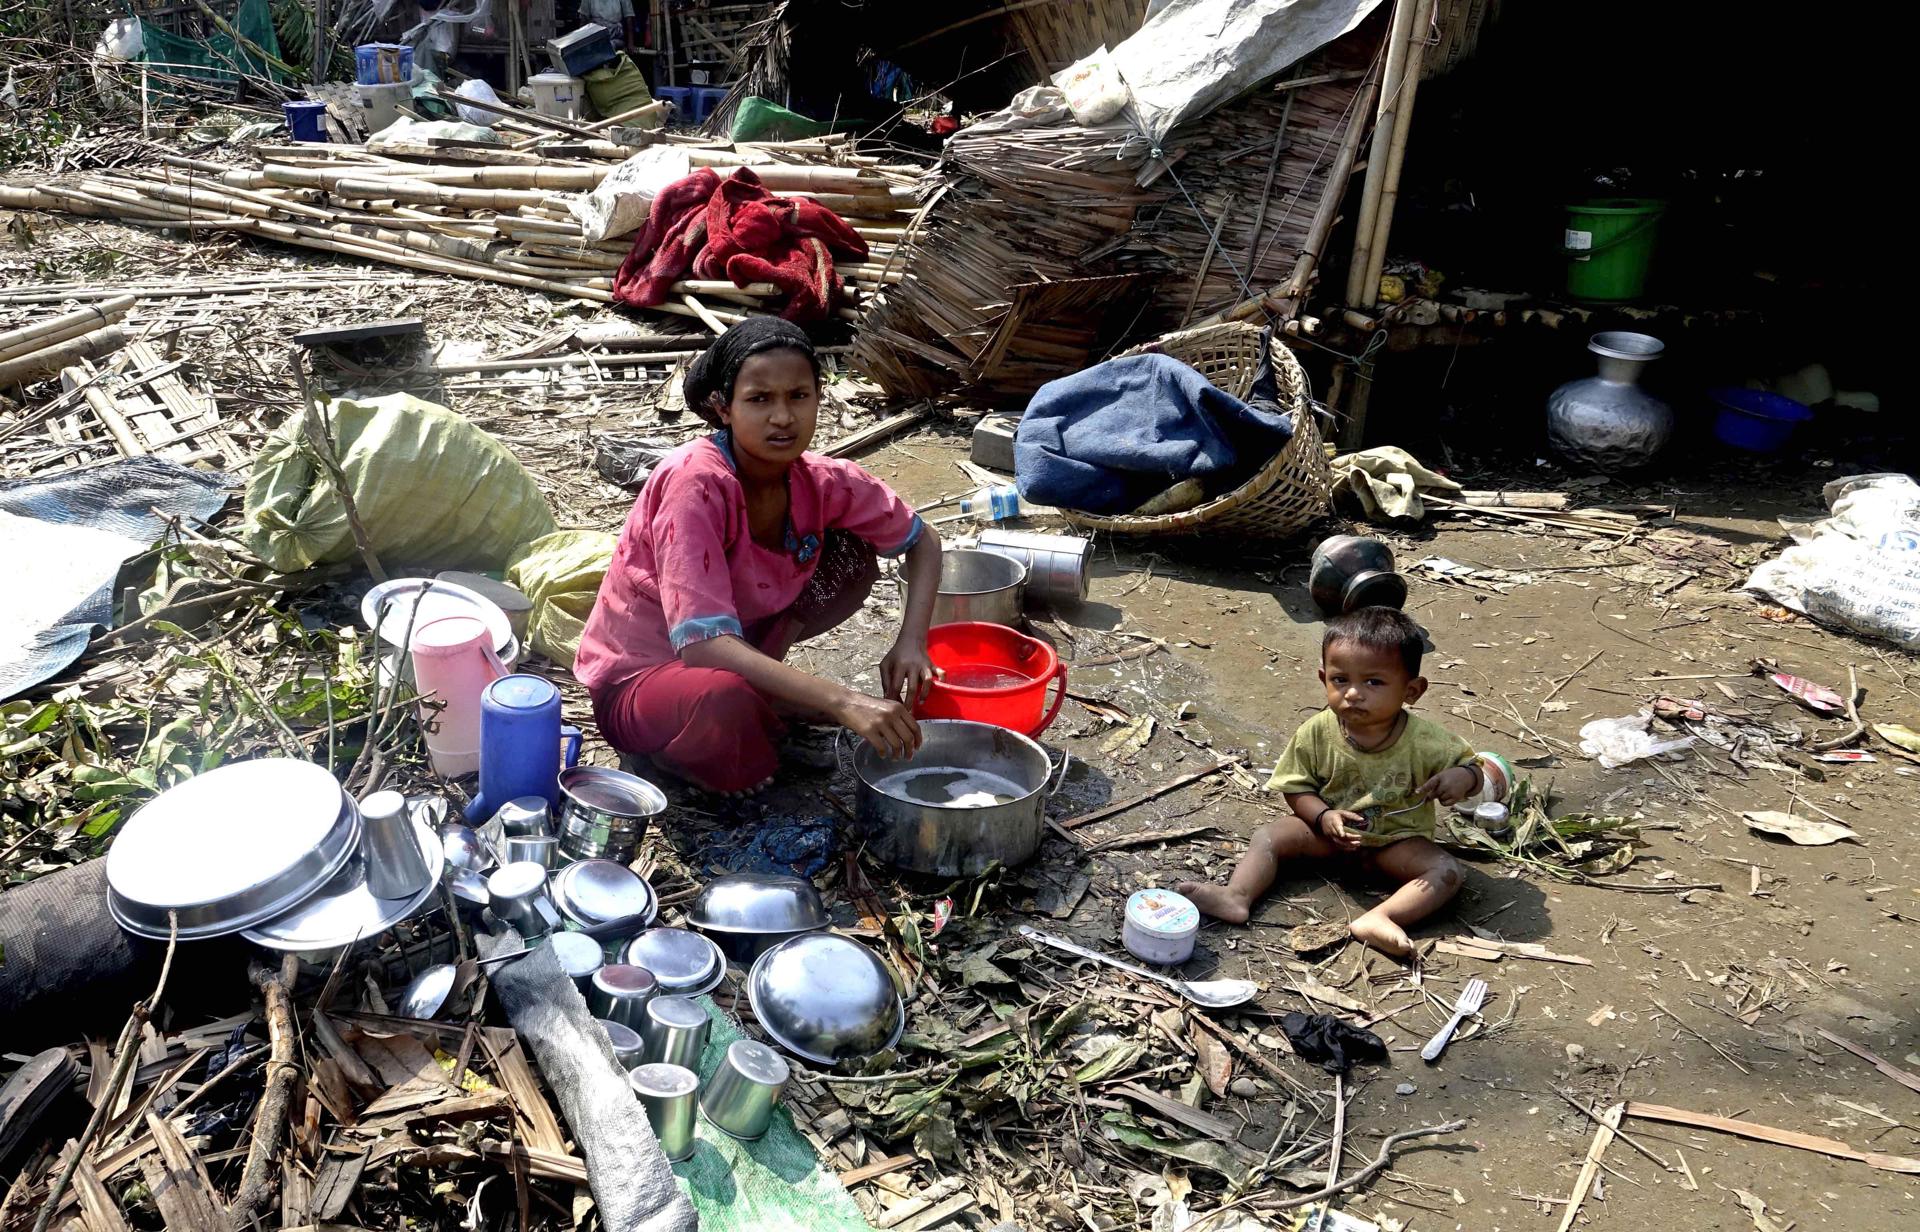 A Rohingya woman and her child amid the destruction caused by Cyclone Mocha at a refugee camp. EFE/EPA/STRINGER